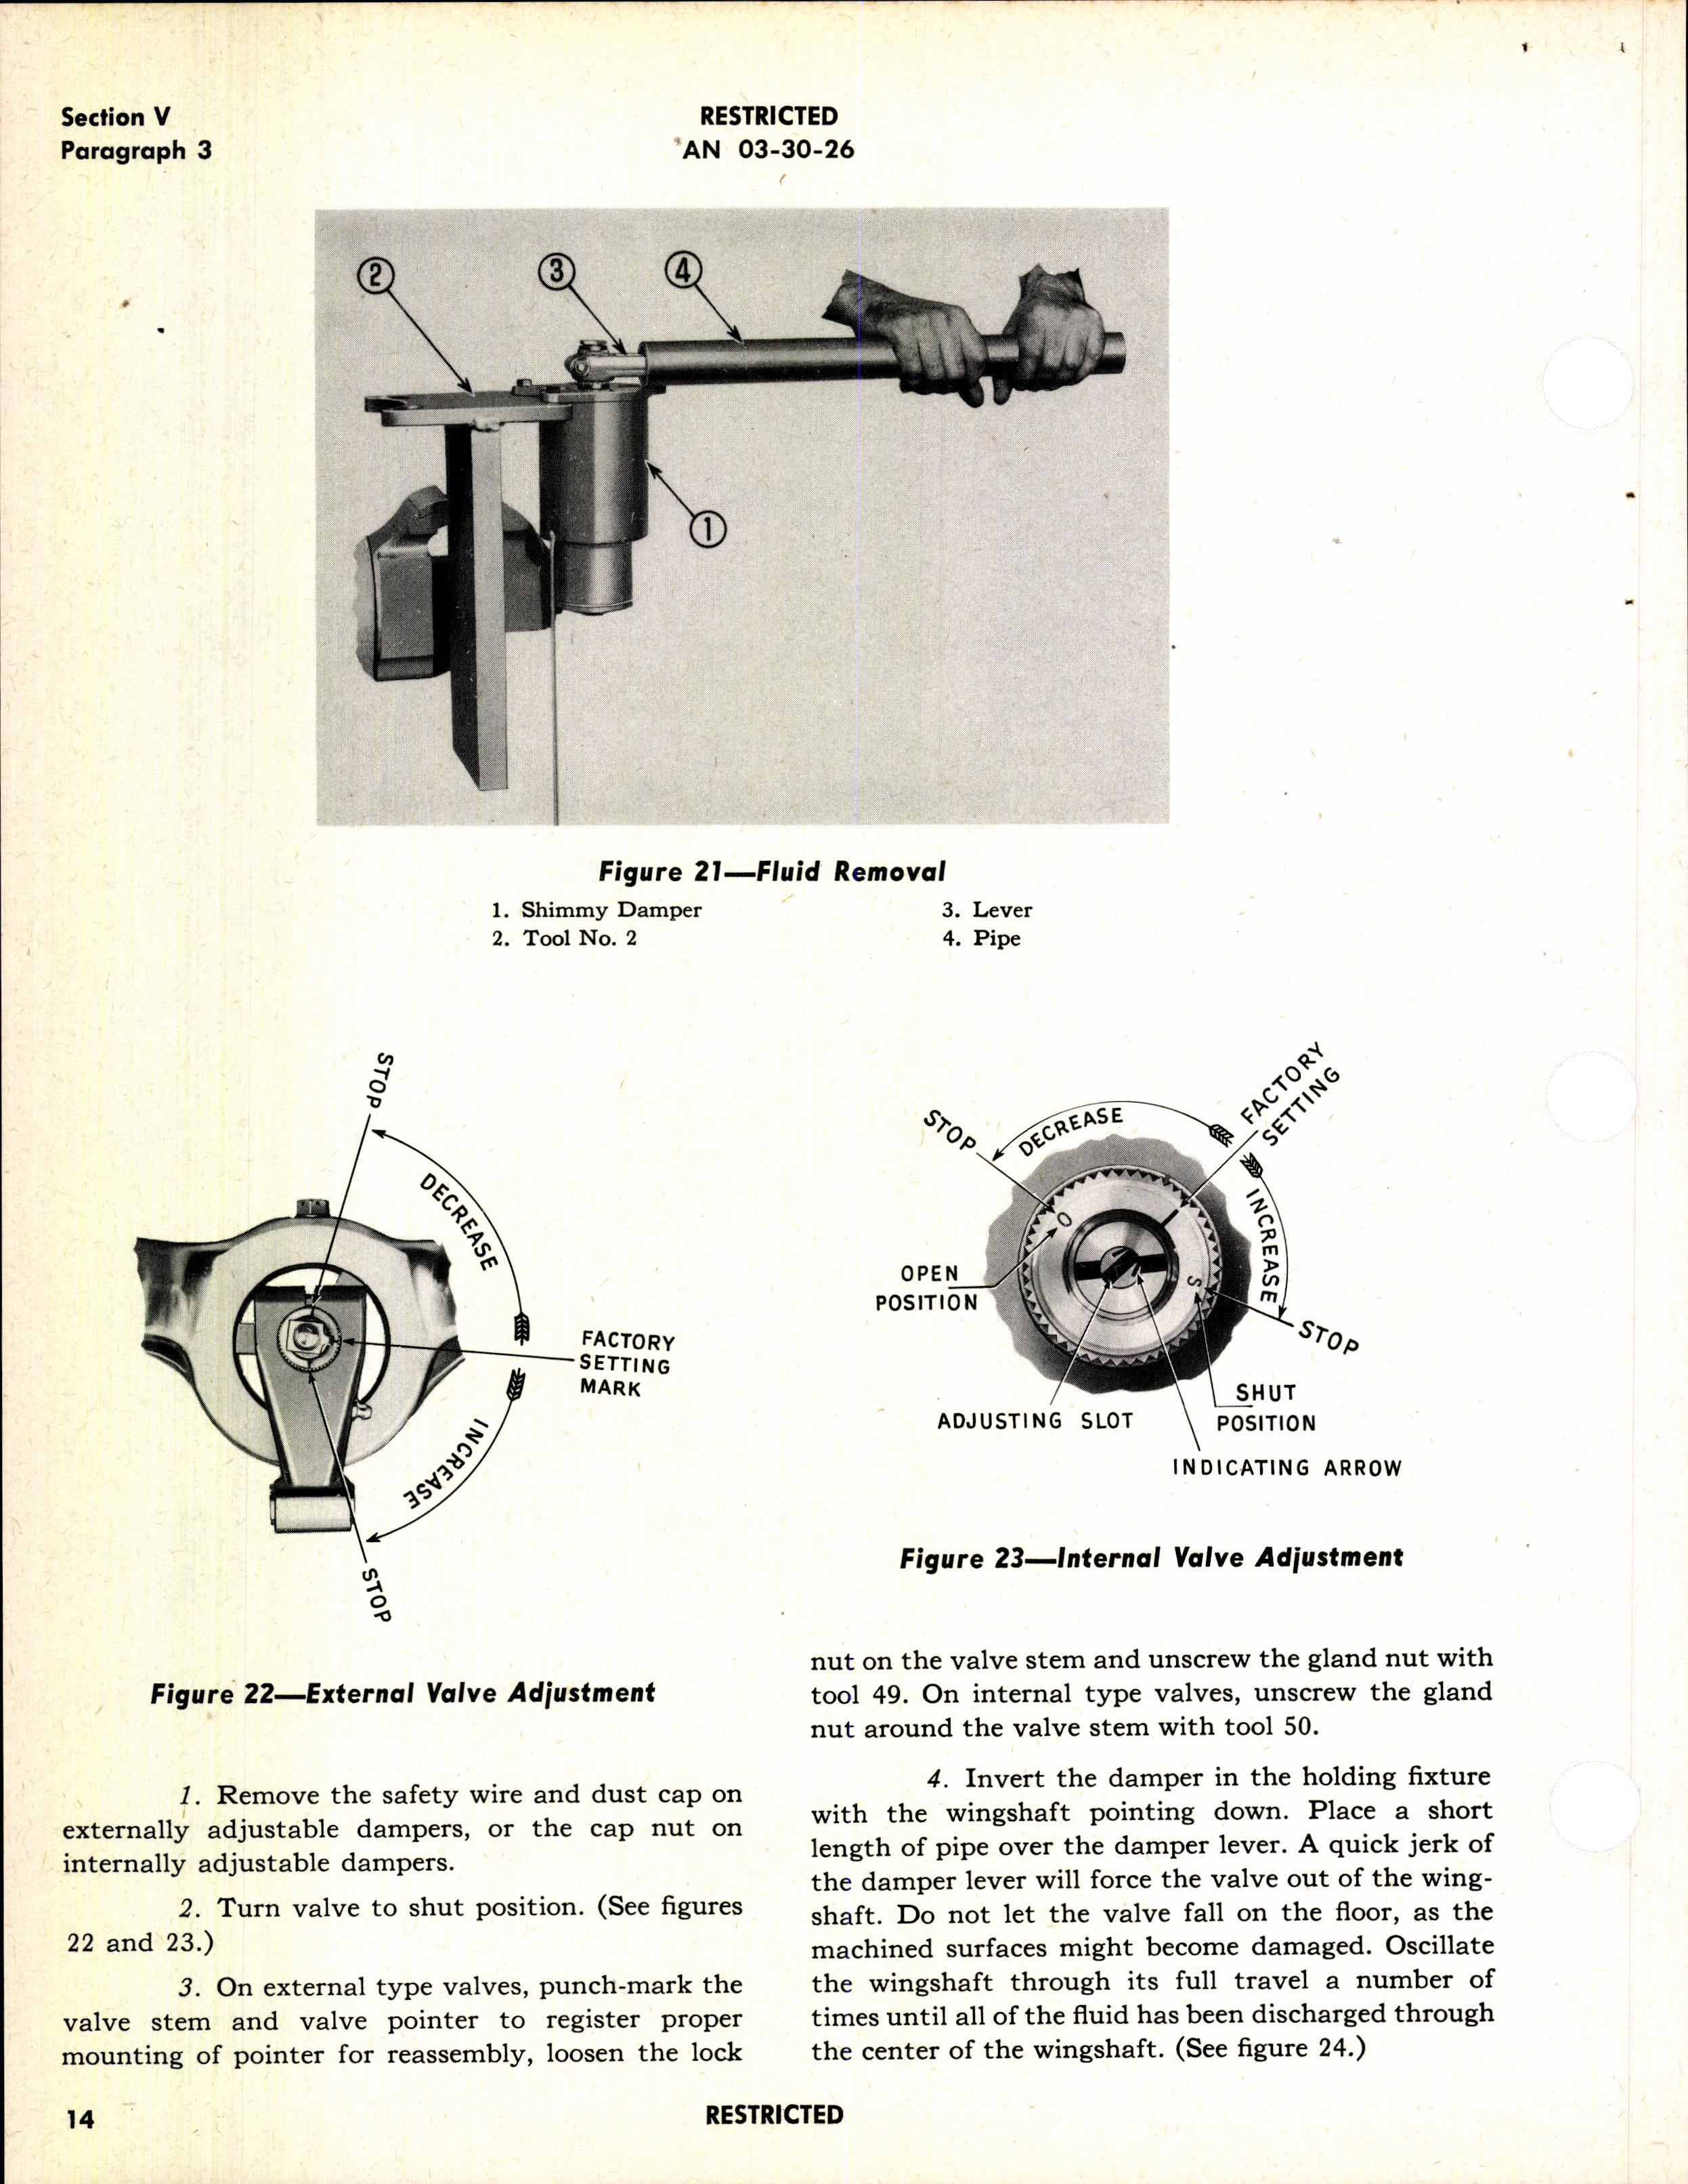 Sample page 42 from AirCorps Library document: Operation, Service, and Overhaul Instructions with Parts Catalog for Shimmy Dampers